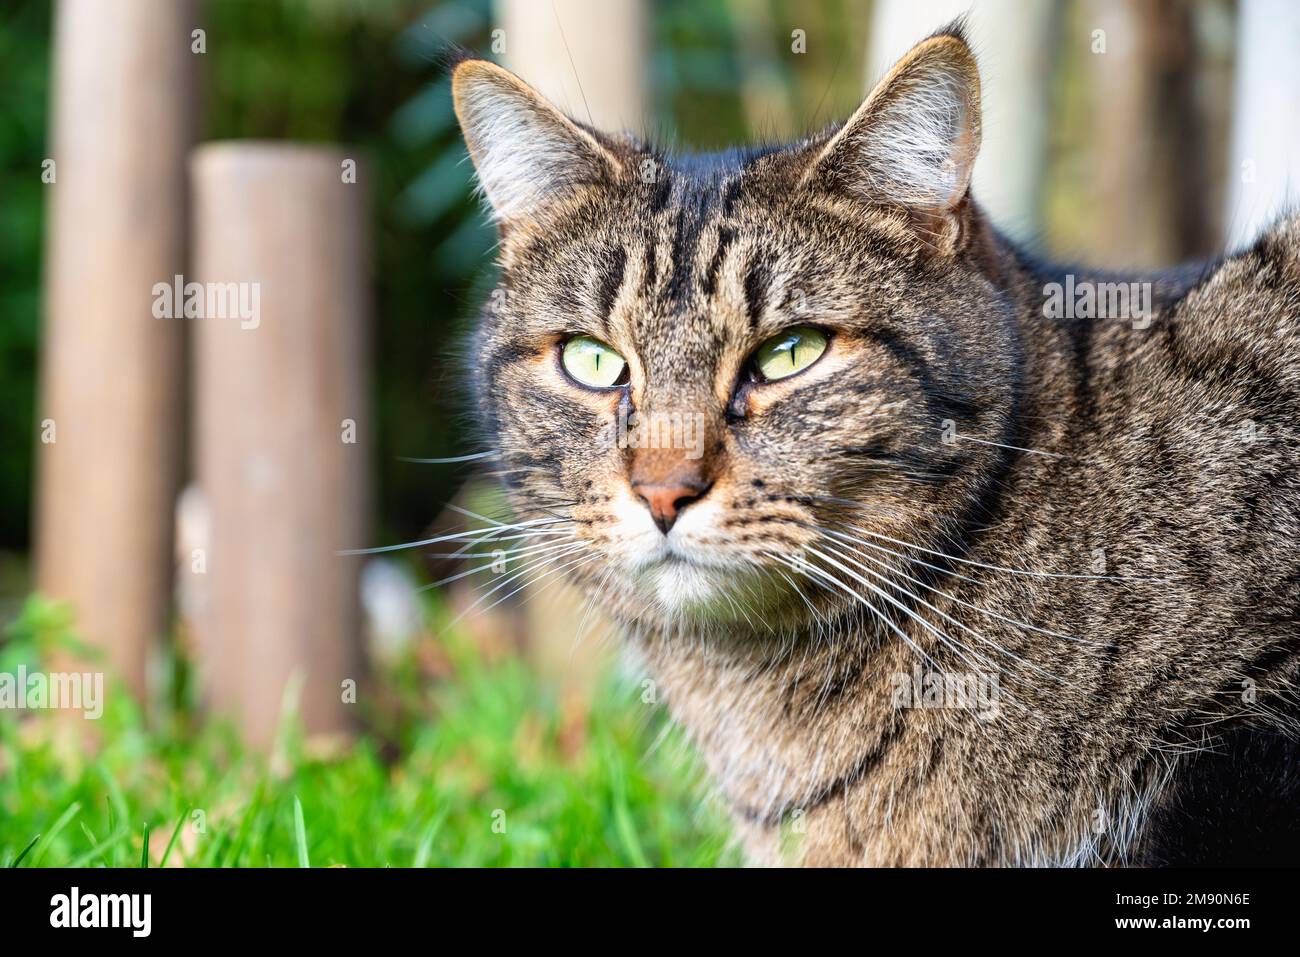 Close-up of the cat's head. Stunning cat face. Black and brown cat.Cute cat Stock Photo